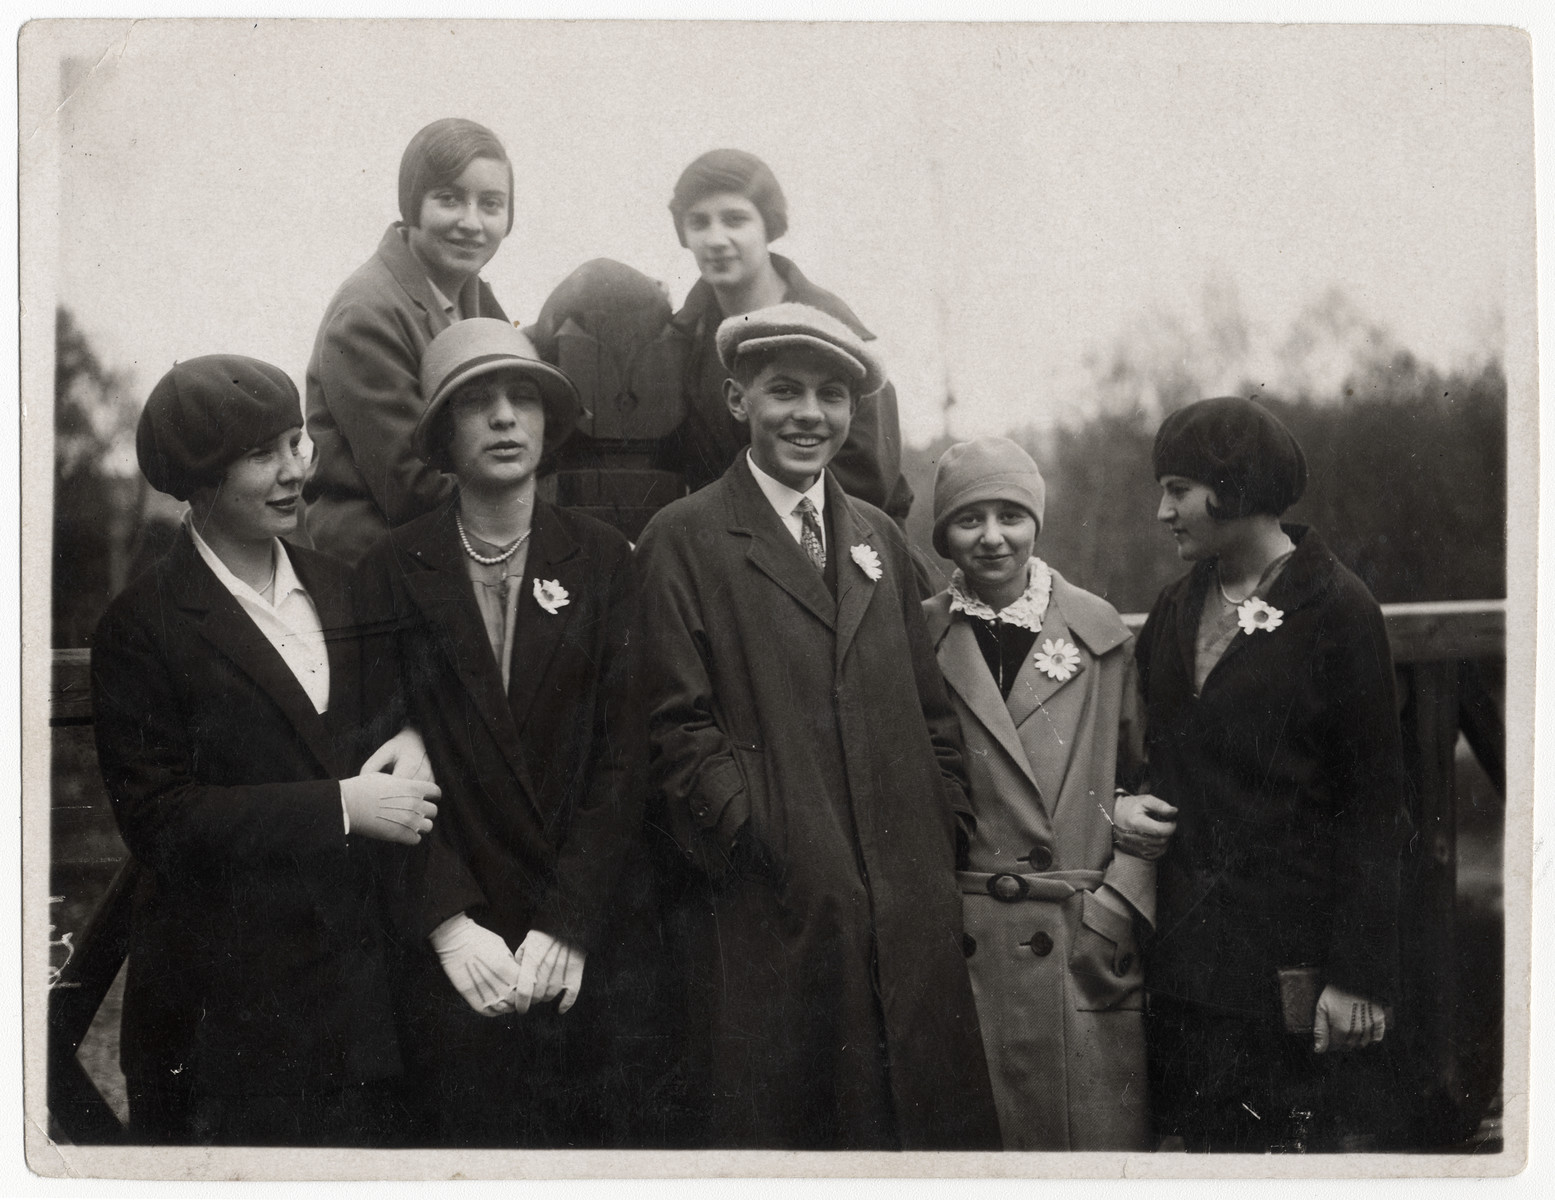 Group portrait of Jewish and non-Jewish young adults in Riga, Latvia.

Among those pictured are Sofia Javorkovsky (mother of the donor), first row, second from right and her best friend, Elena Berzin (later Francman) in front left.

Elena Francman helped the Javorkovsky family by bringing food into the ghetto and keeping their valuables safe and returning them after the war.